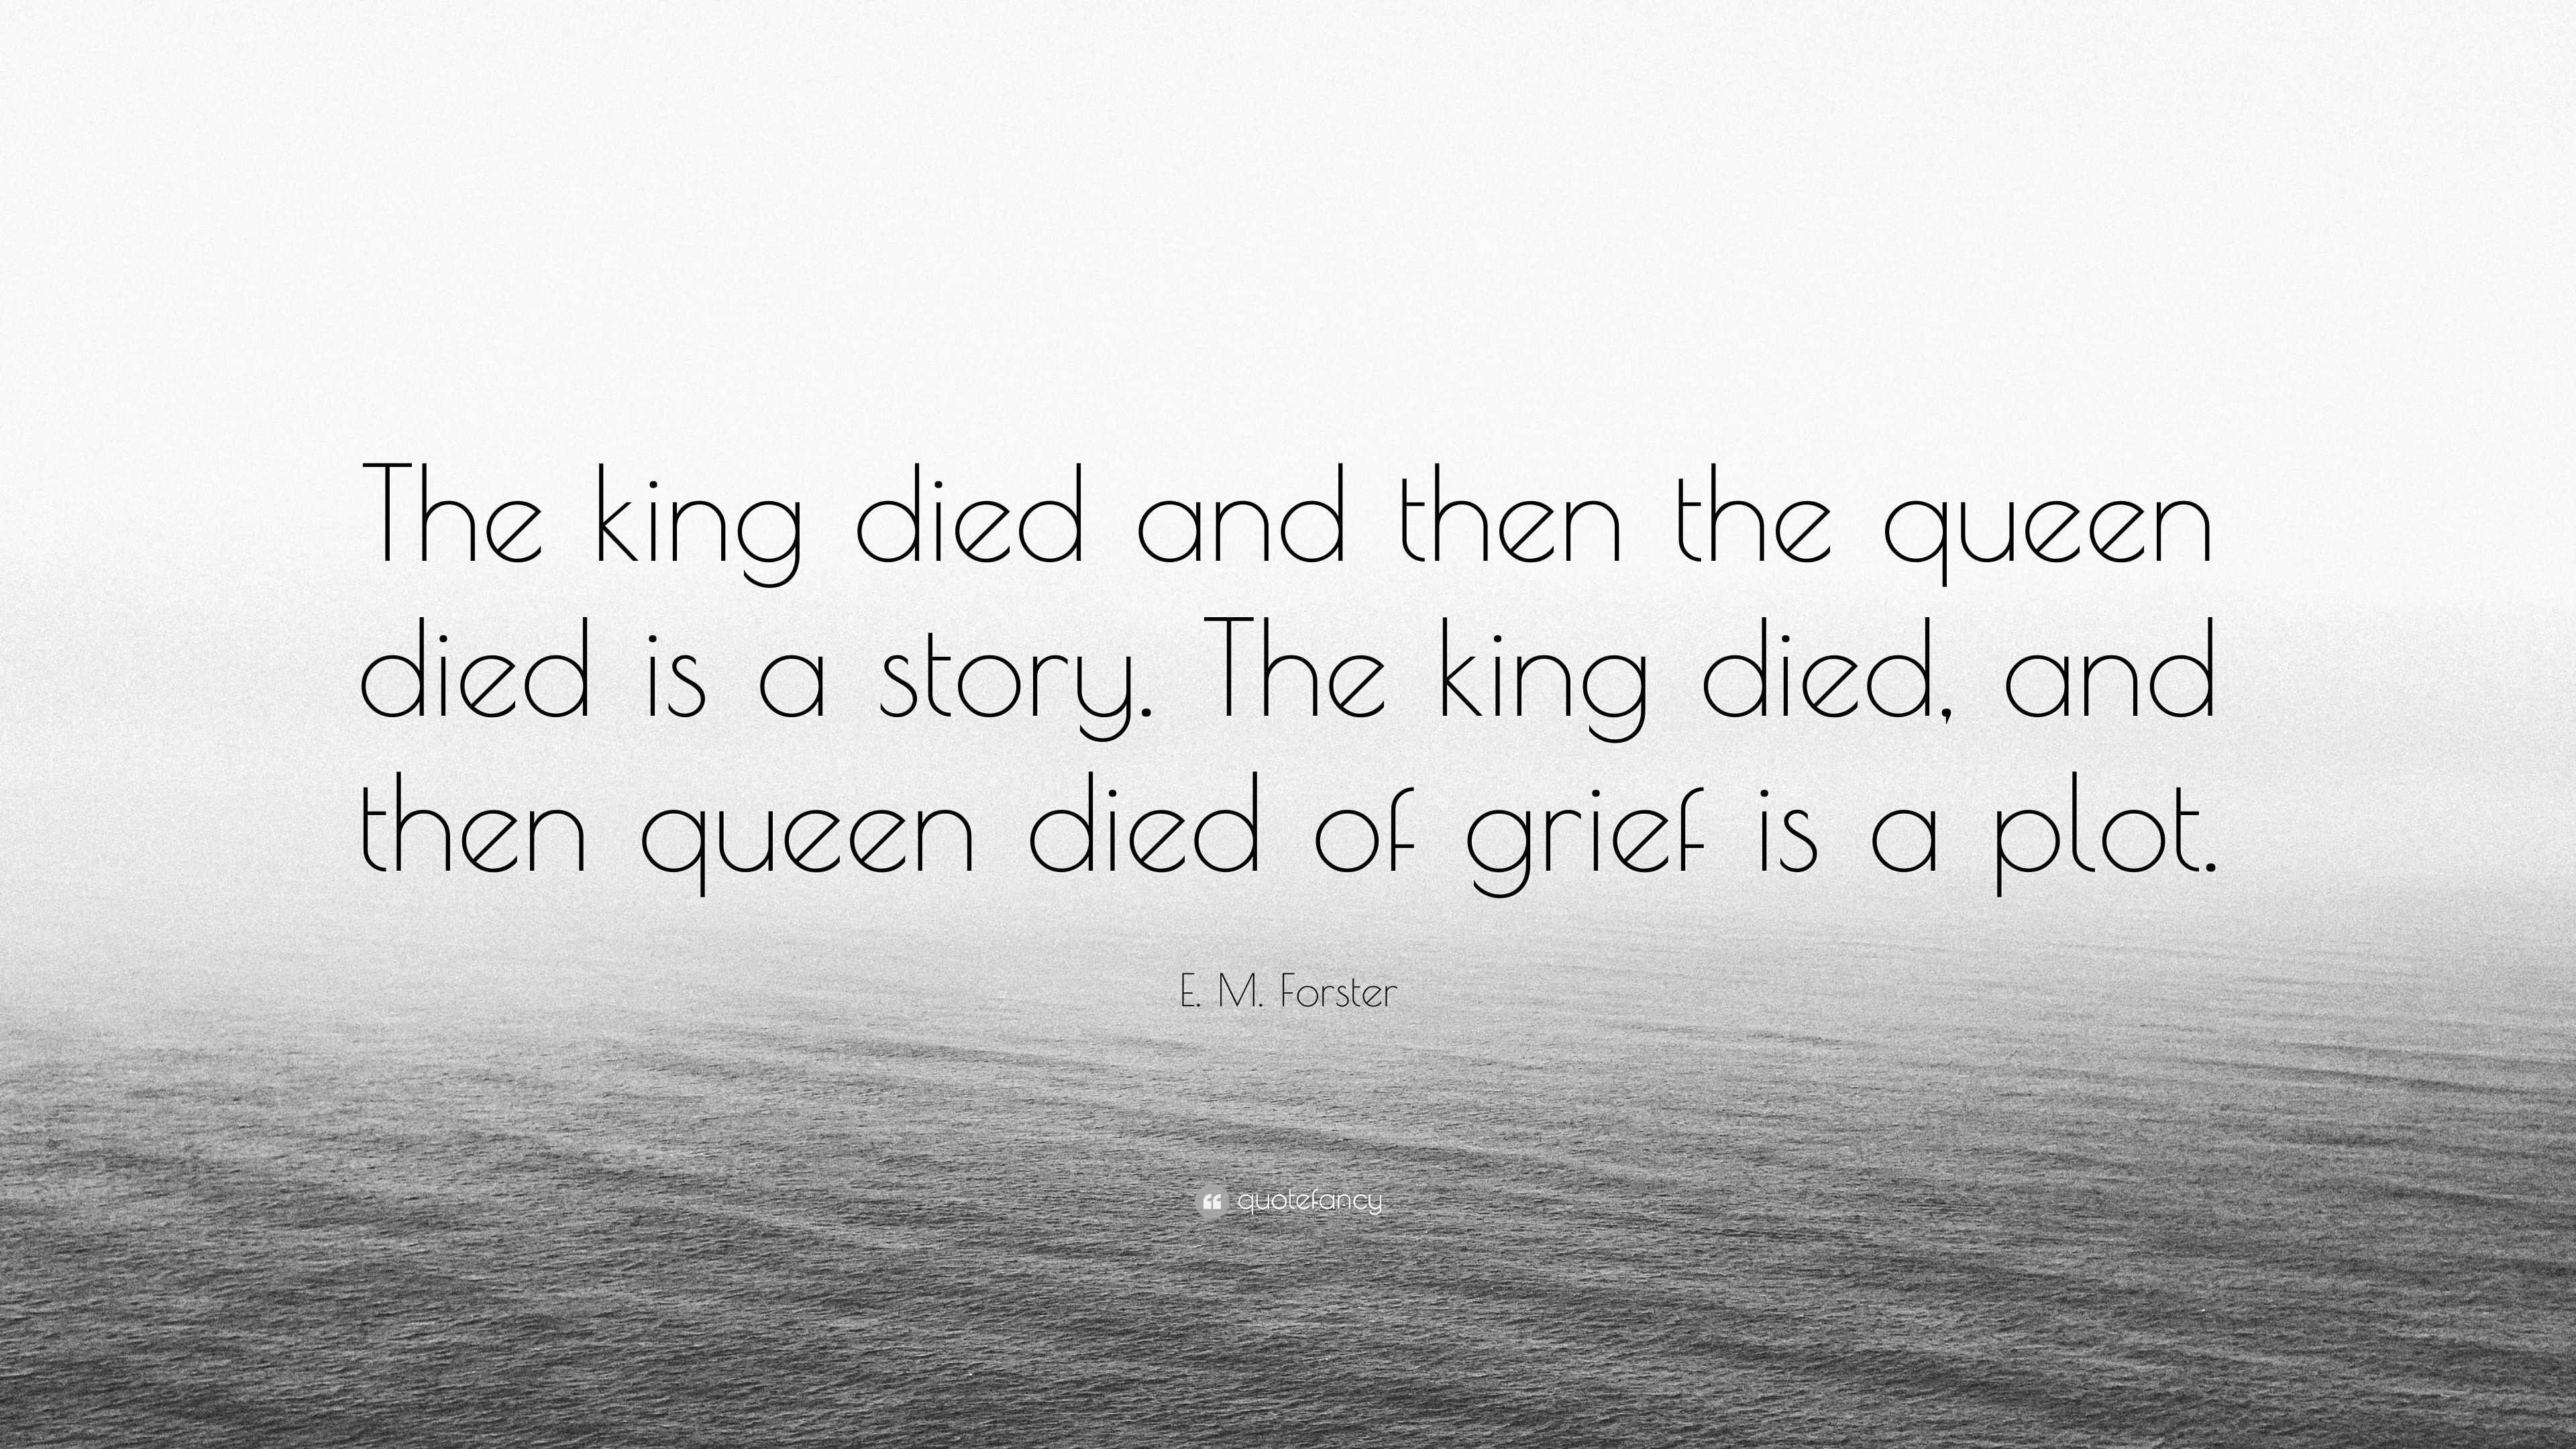 E. M. Forster Quote: “The king died and then the queen died is a story ...